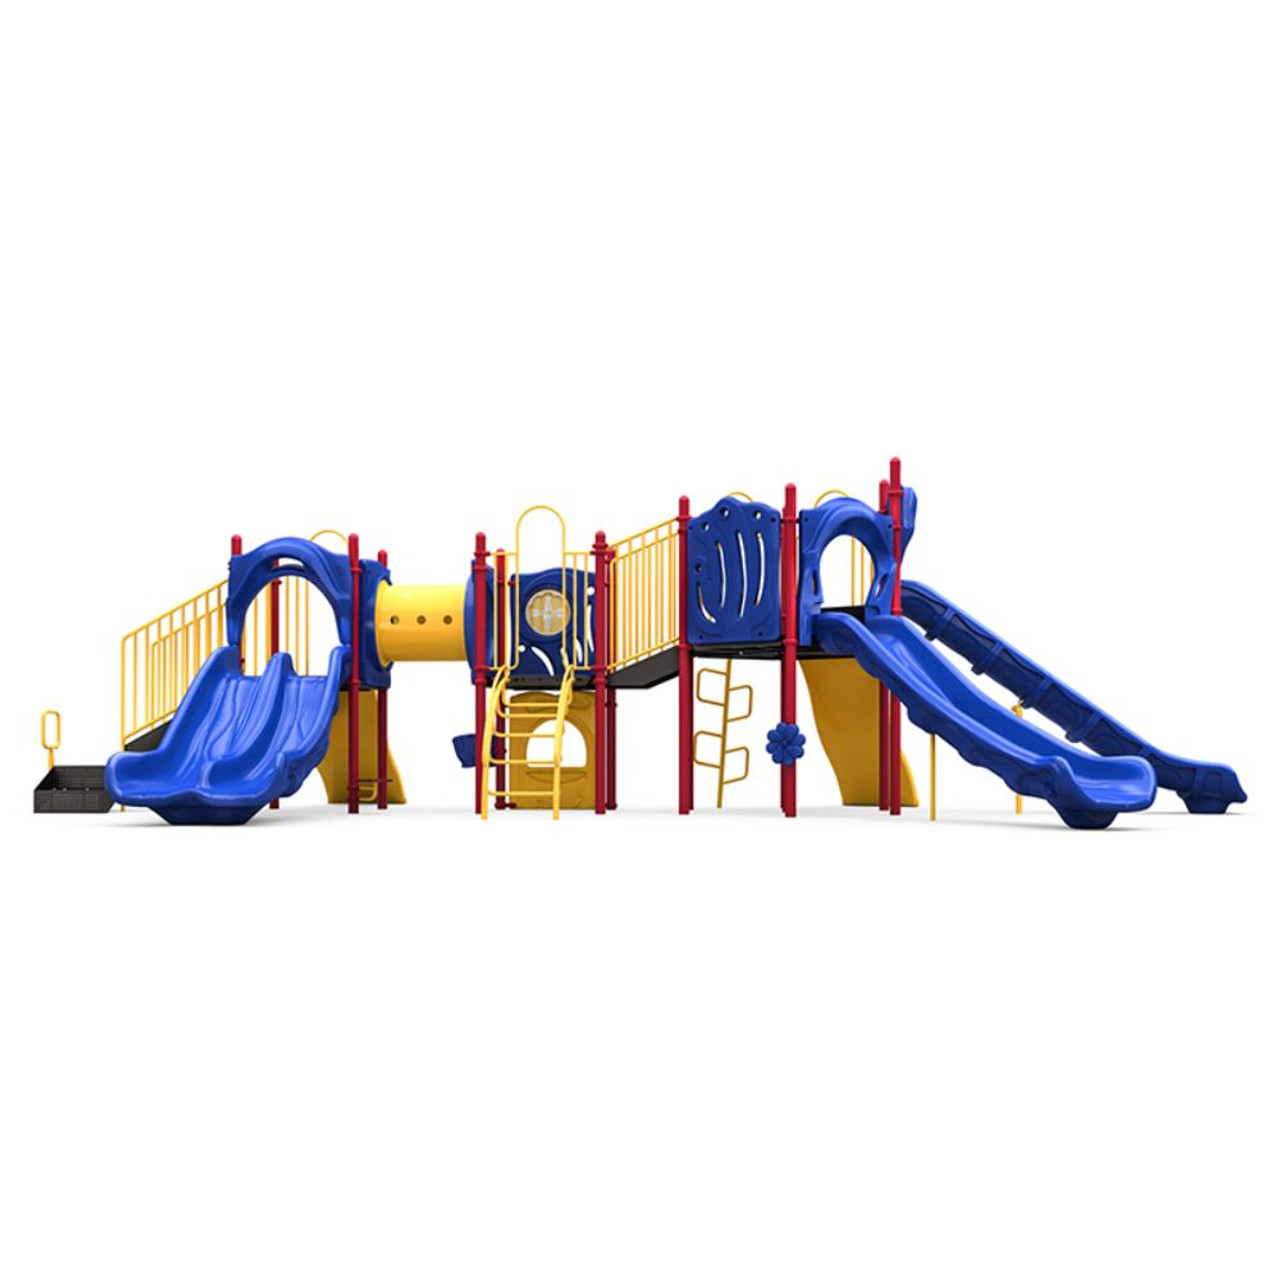 Harpers Place Playset - primary - front